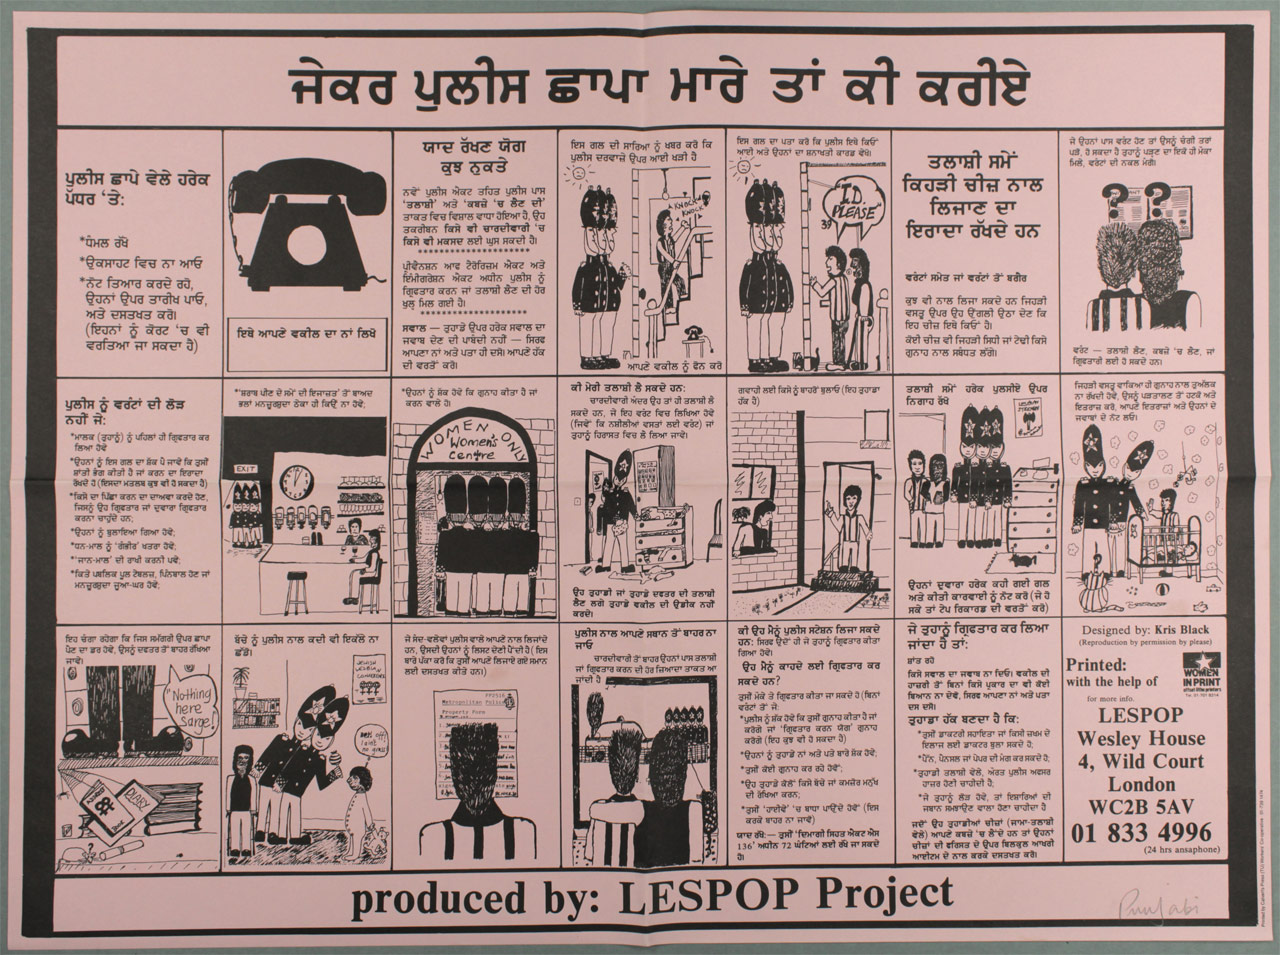 What to do if the police raid (Punjabi version), LESPOP, Lesbians and Policing Project poster, designed by Kris Black, c. 1985